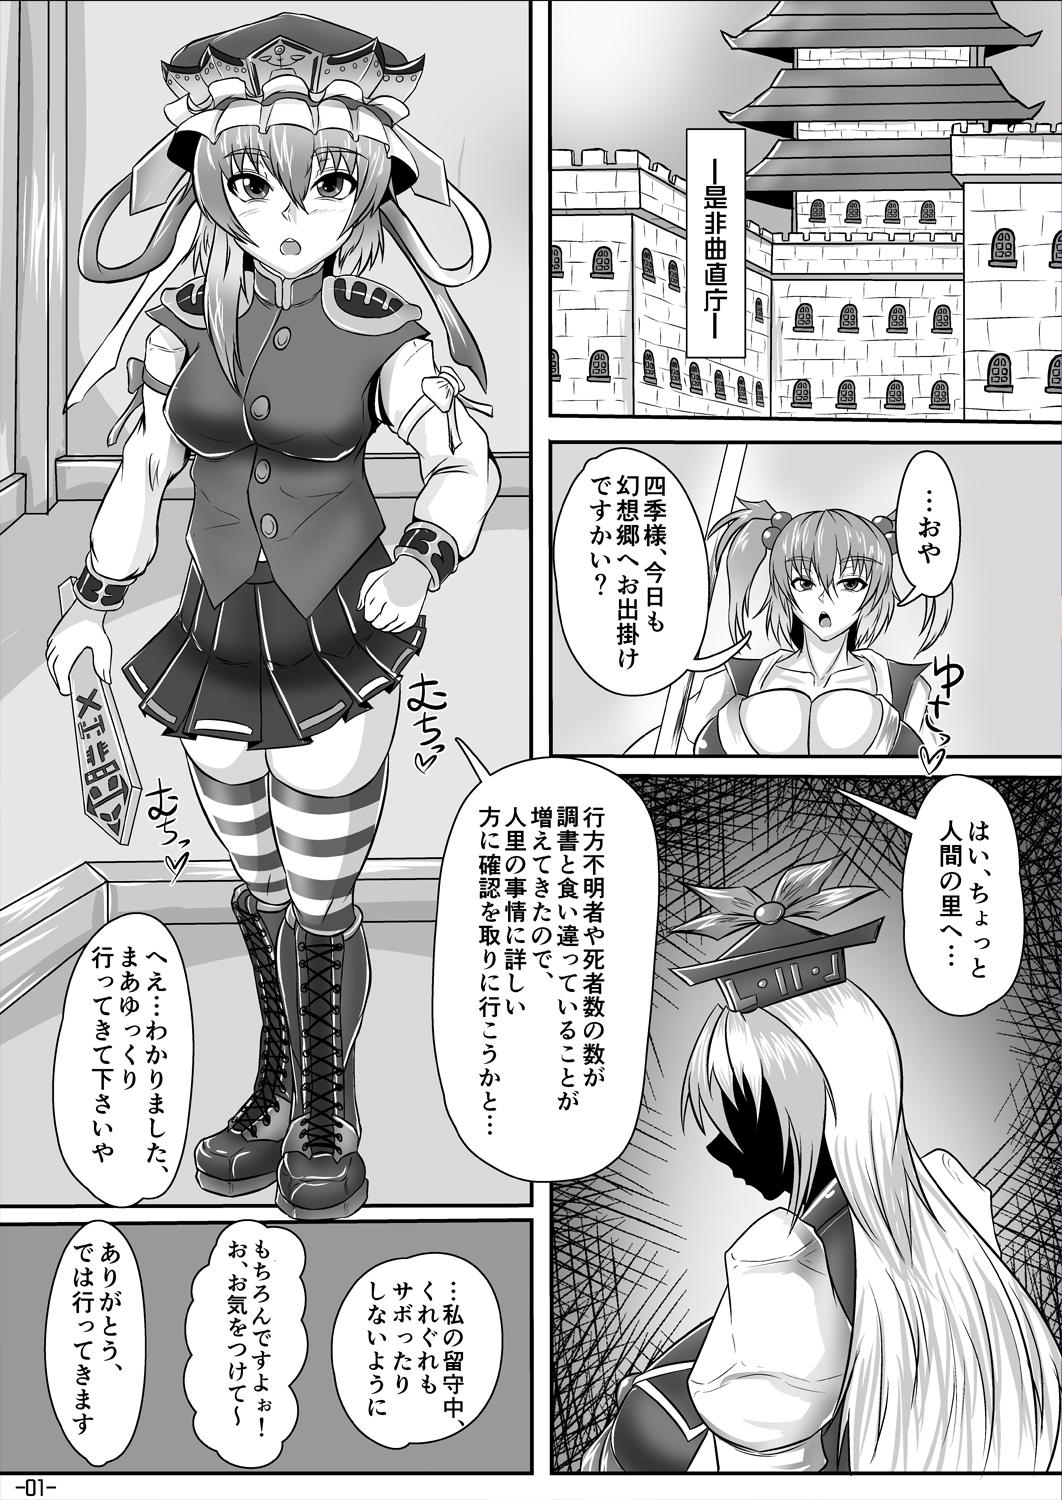 Teenporno Derangement Judgement - Touhou project Whipping - Page 2